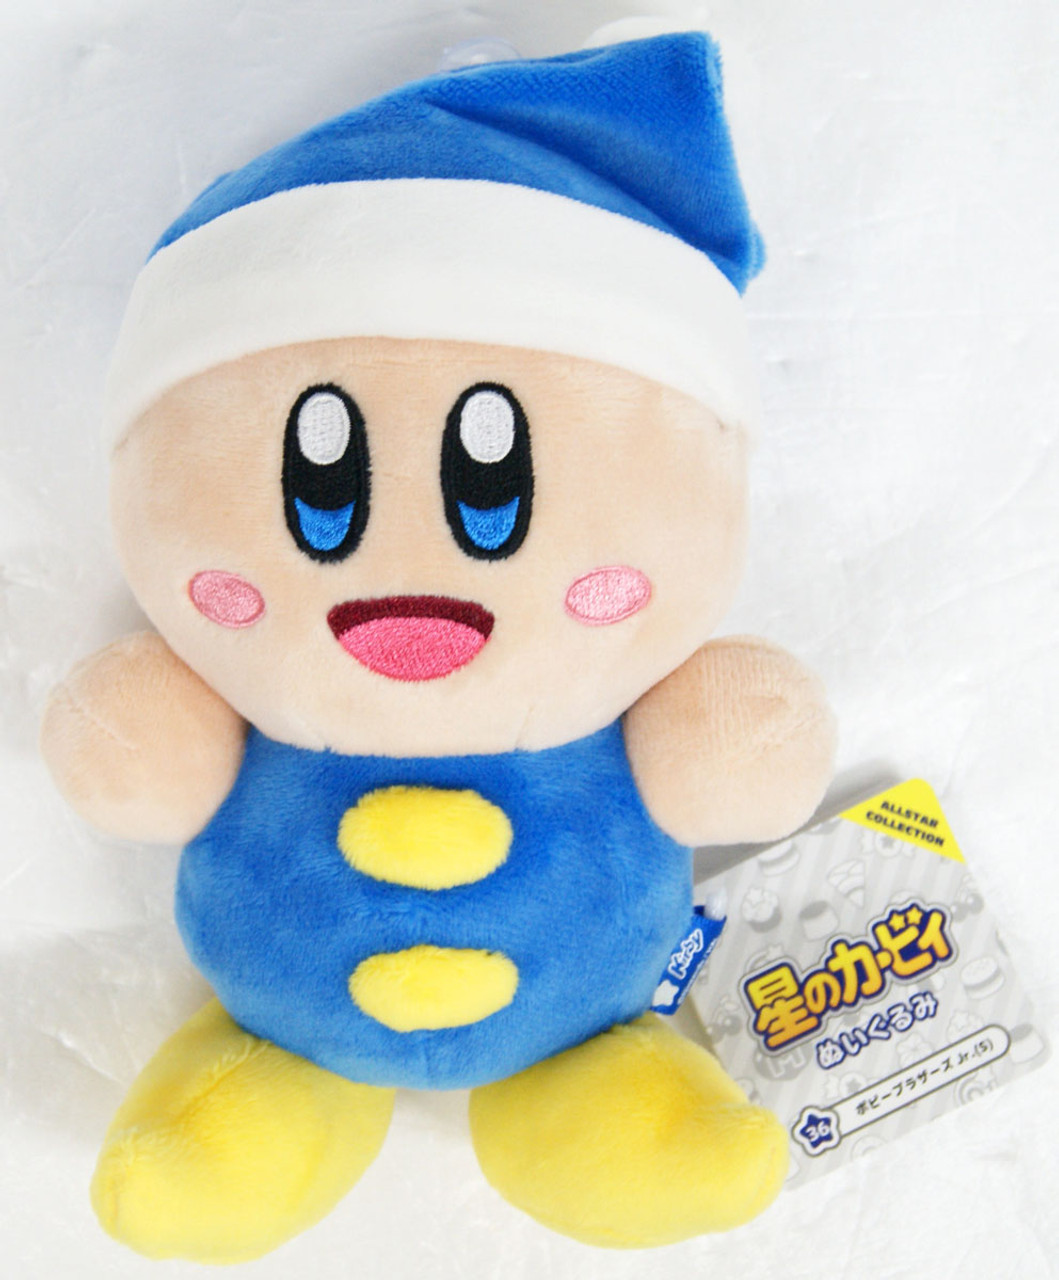 chilly kirby plush